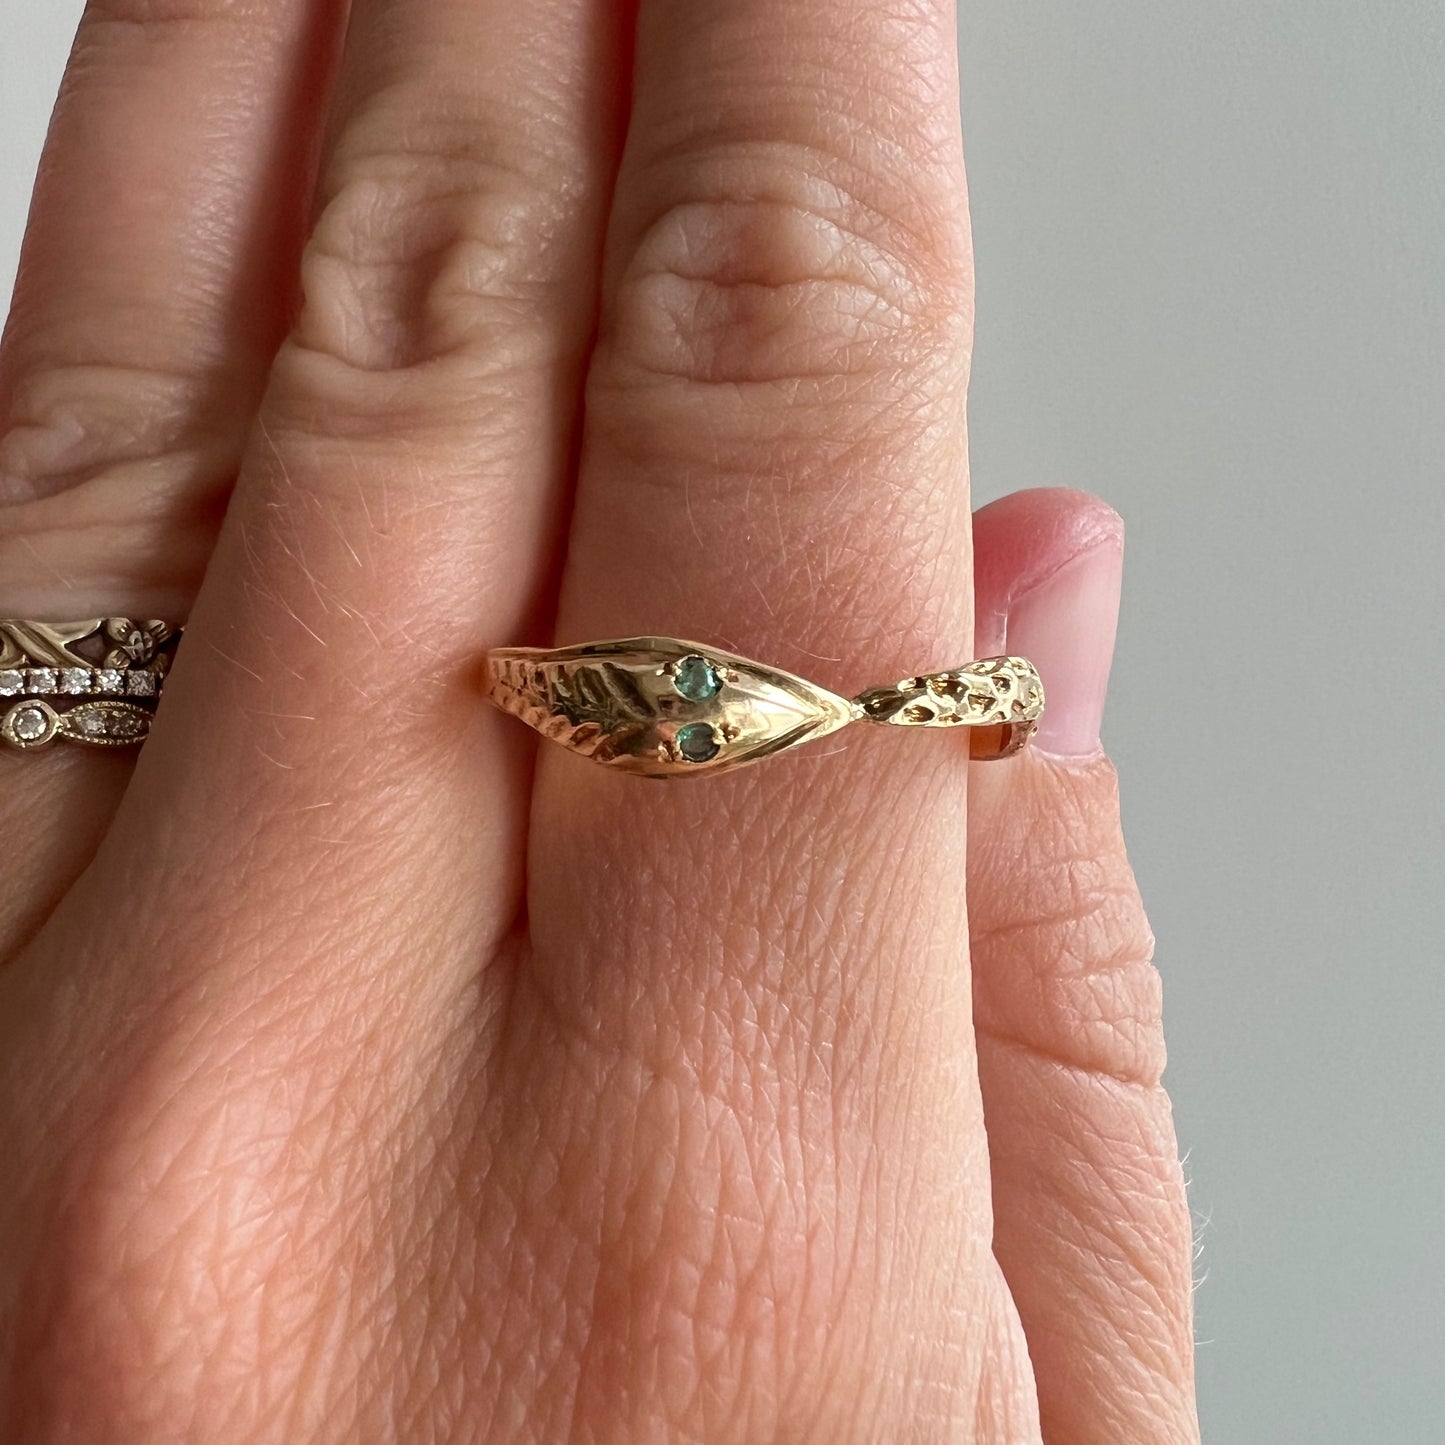 V I N T A G E // sweetest slithering / solid 18k yellow gold and emerald ouroboros snake ring / size 11.25